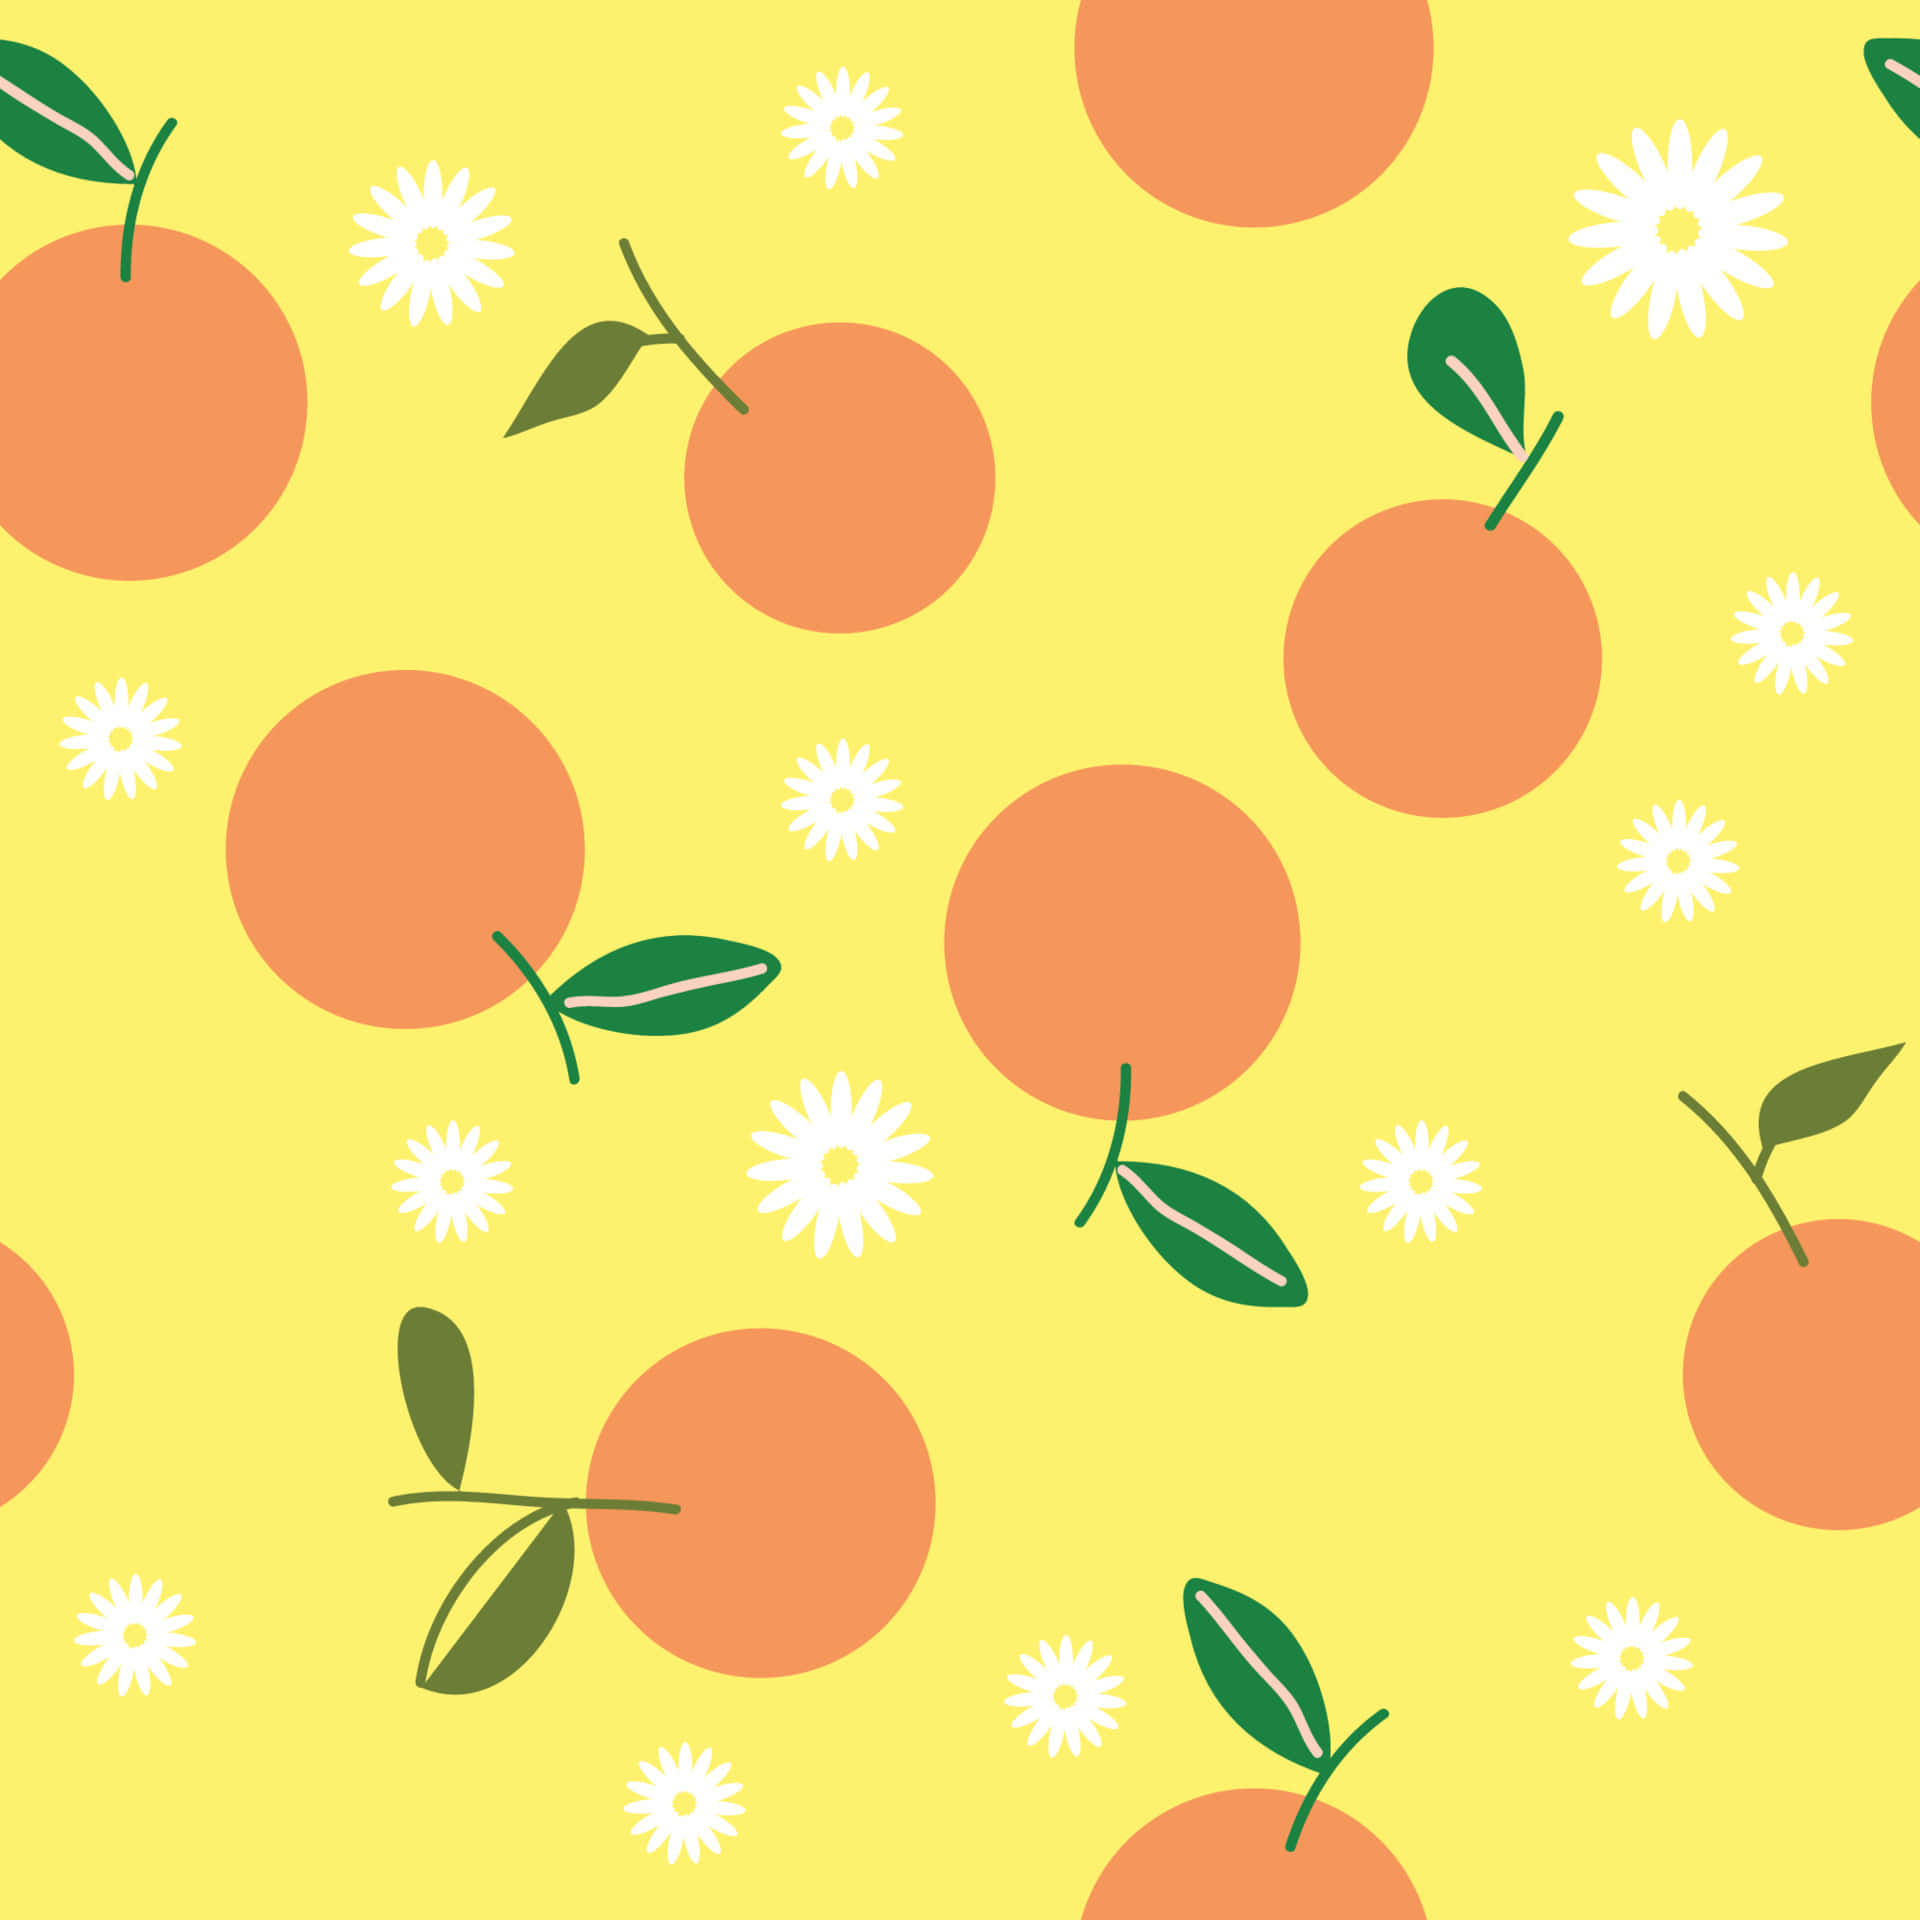 A playful cute orange abstract background featuring soft, blended colors and texture